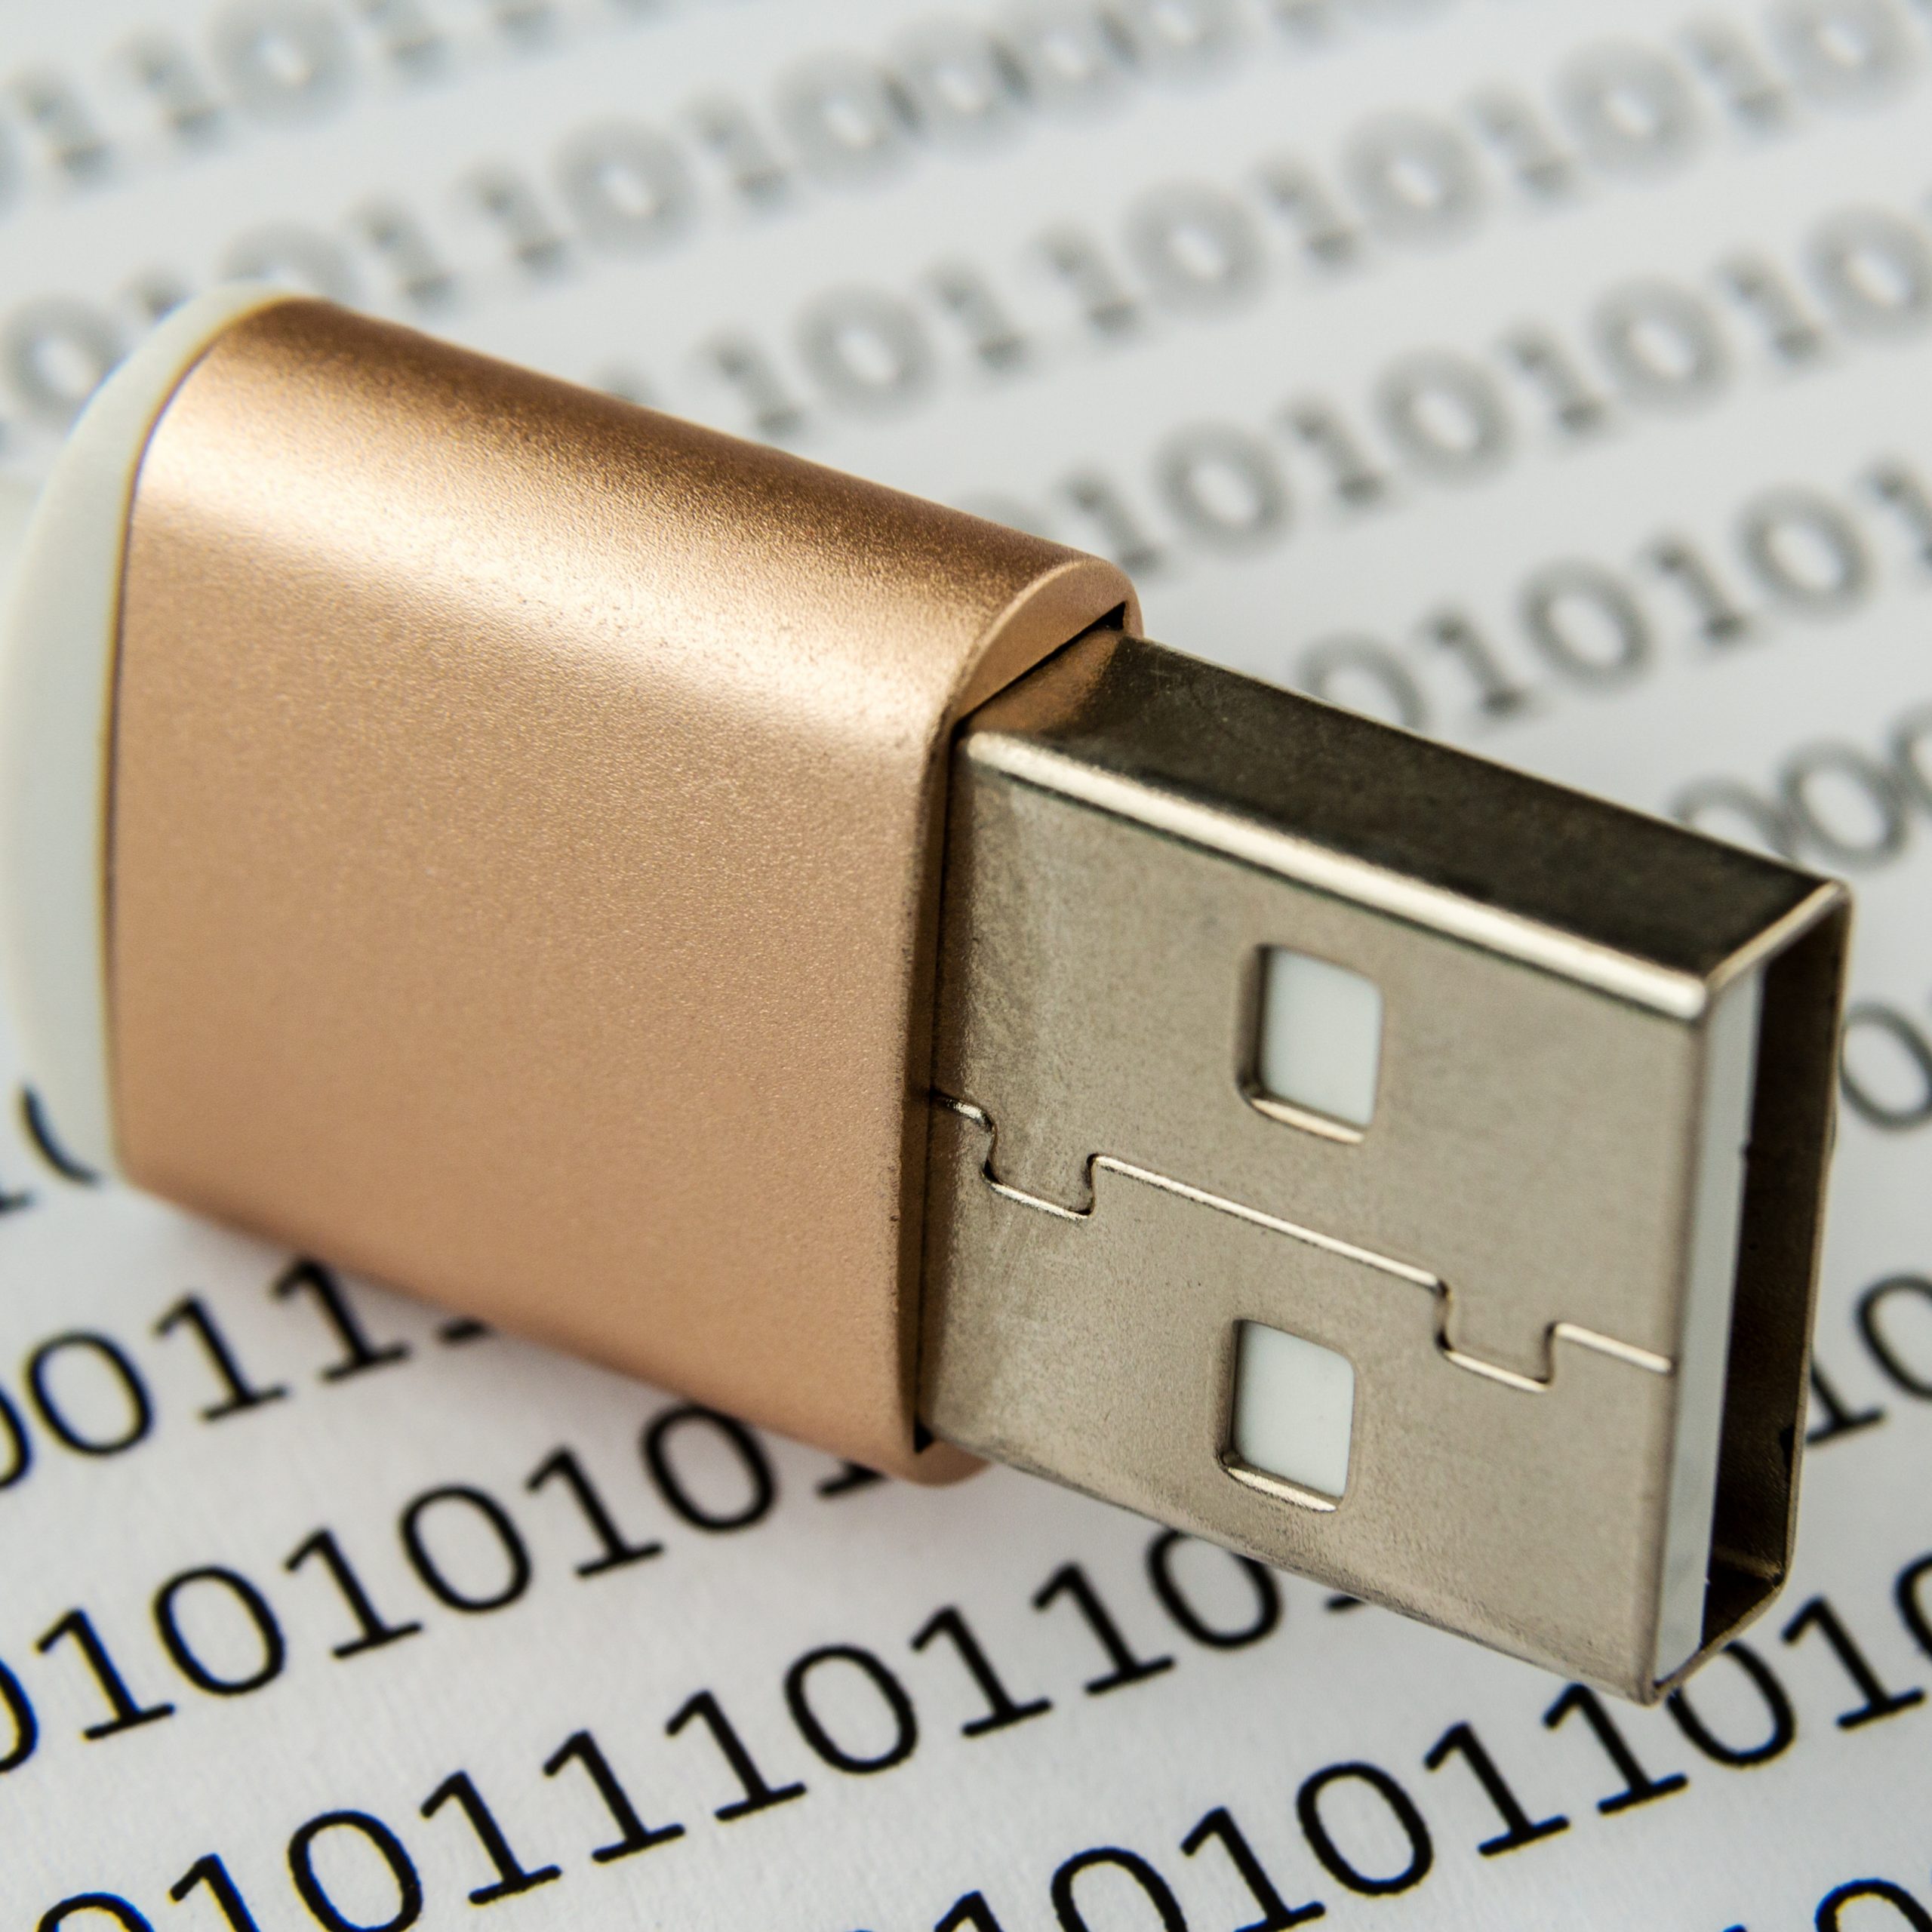 Closeup shot of a USB cable on a piece of paper with numbers and codes written on it